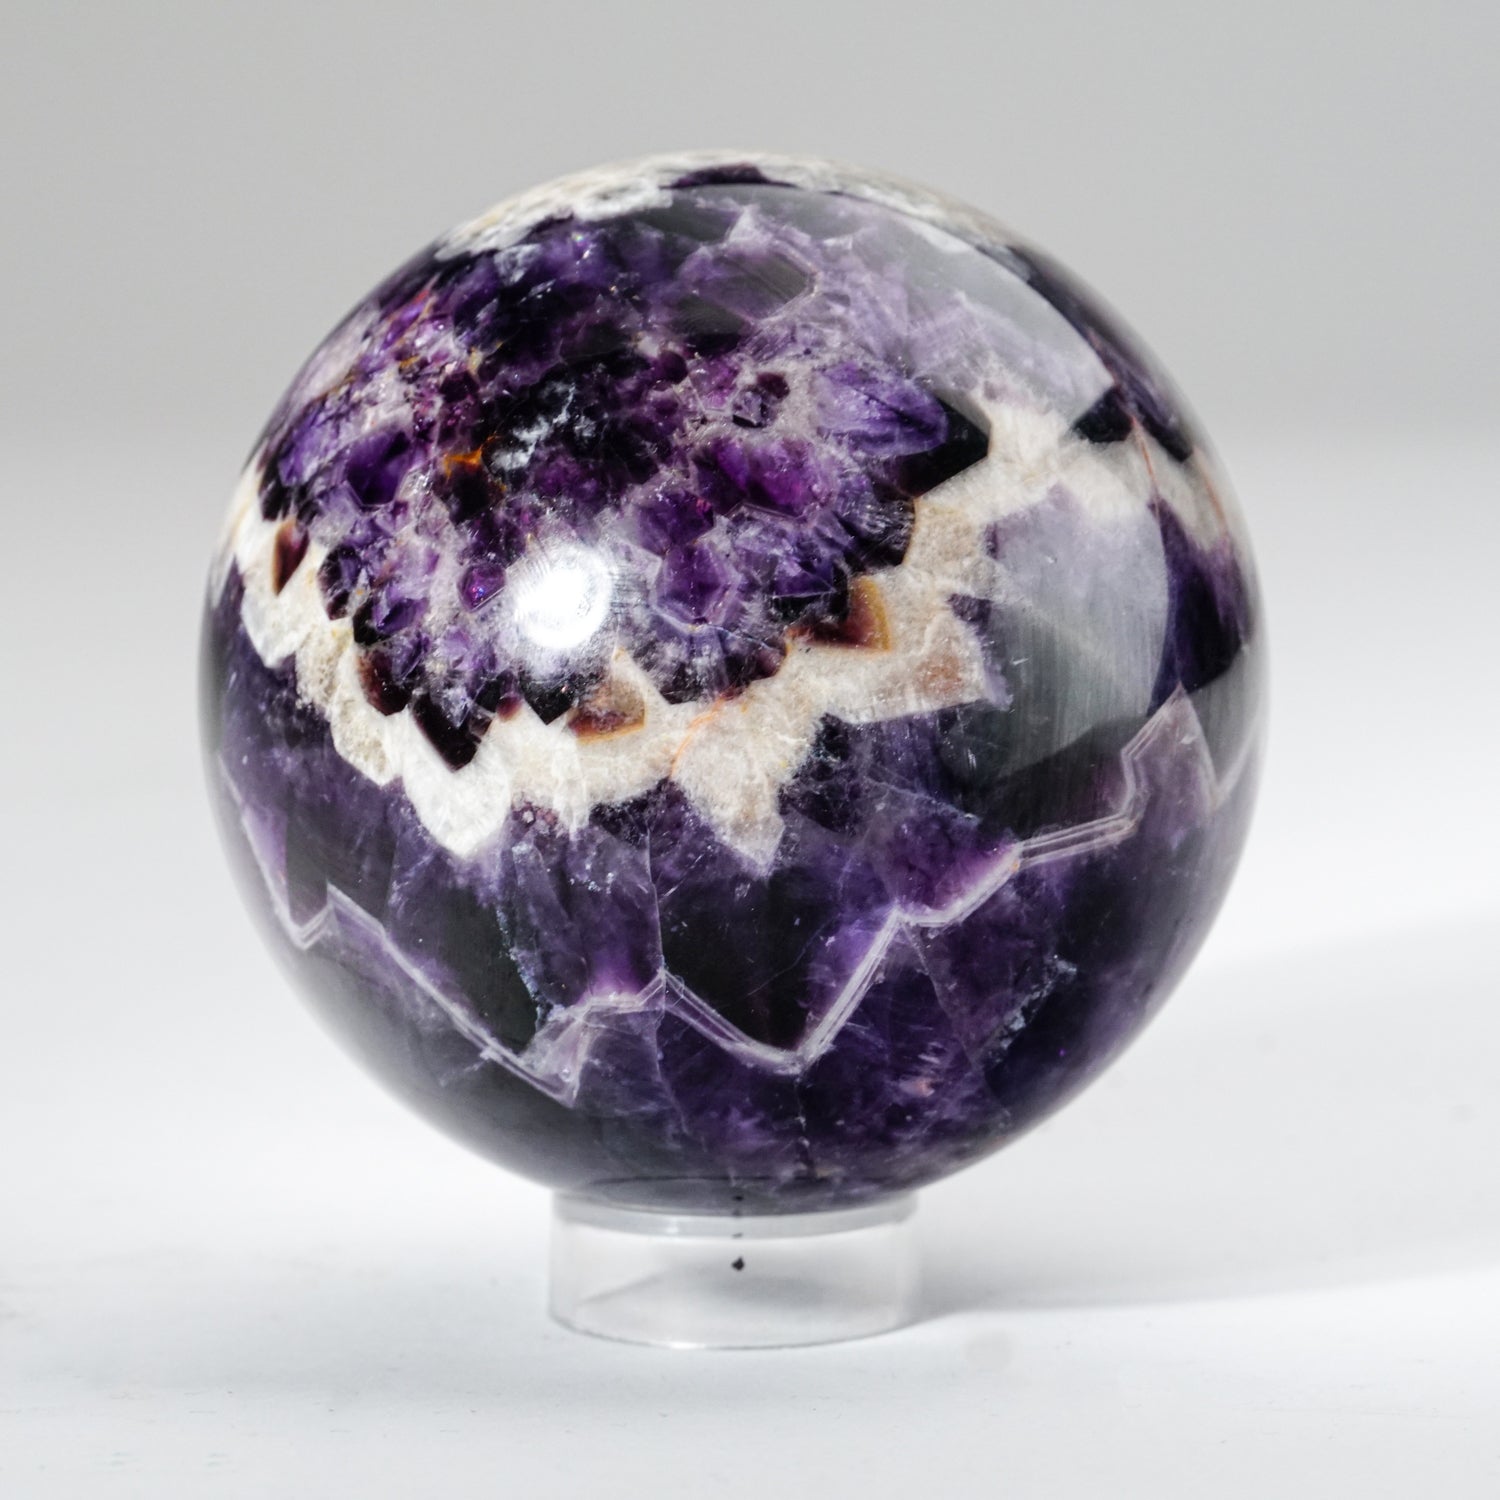 Polished Chevron Amethyst Sphere from Brazil (3.5", 2.5 lbs)